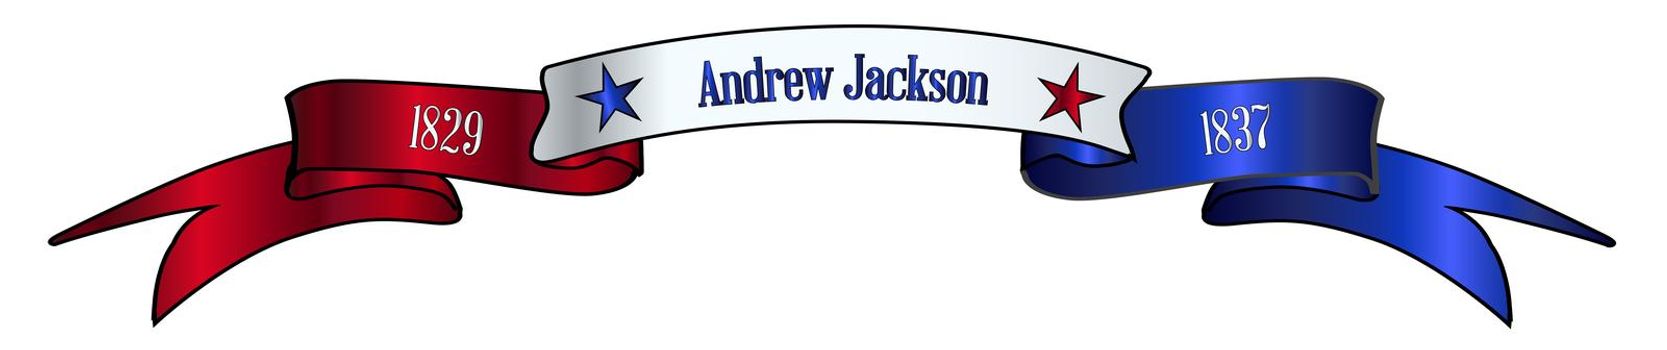 A red white and blue satin or silk ribbon banner with the text John Andrew Jackson and stars and date in office